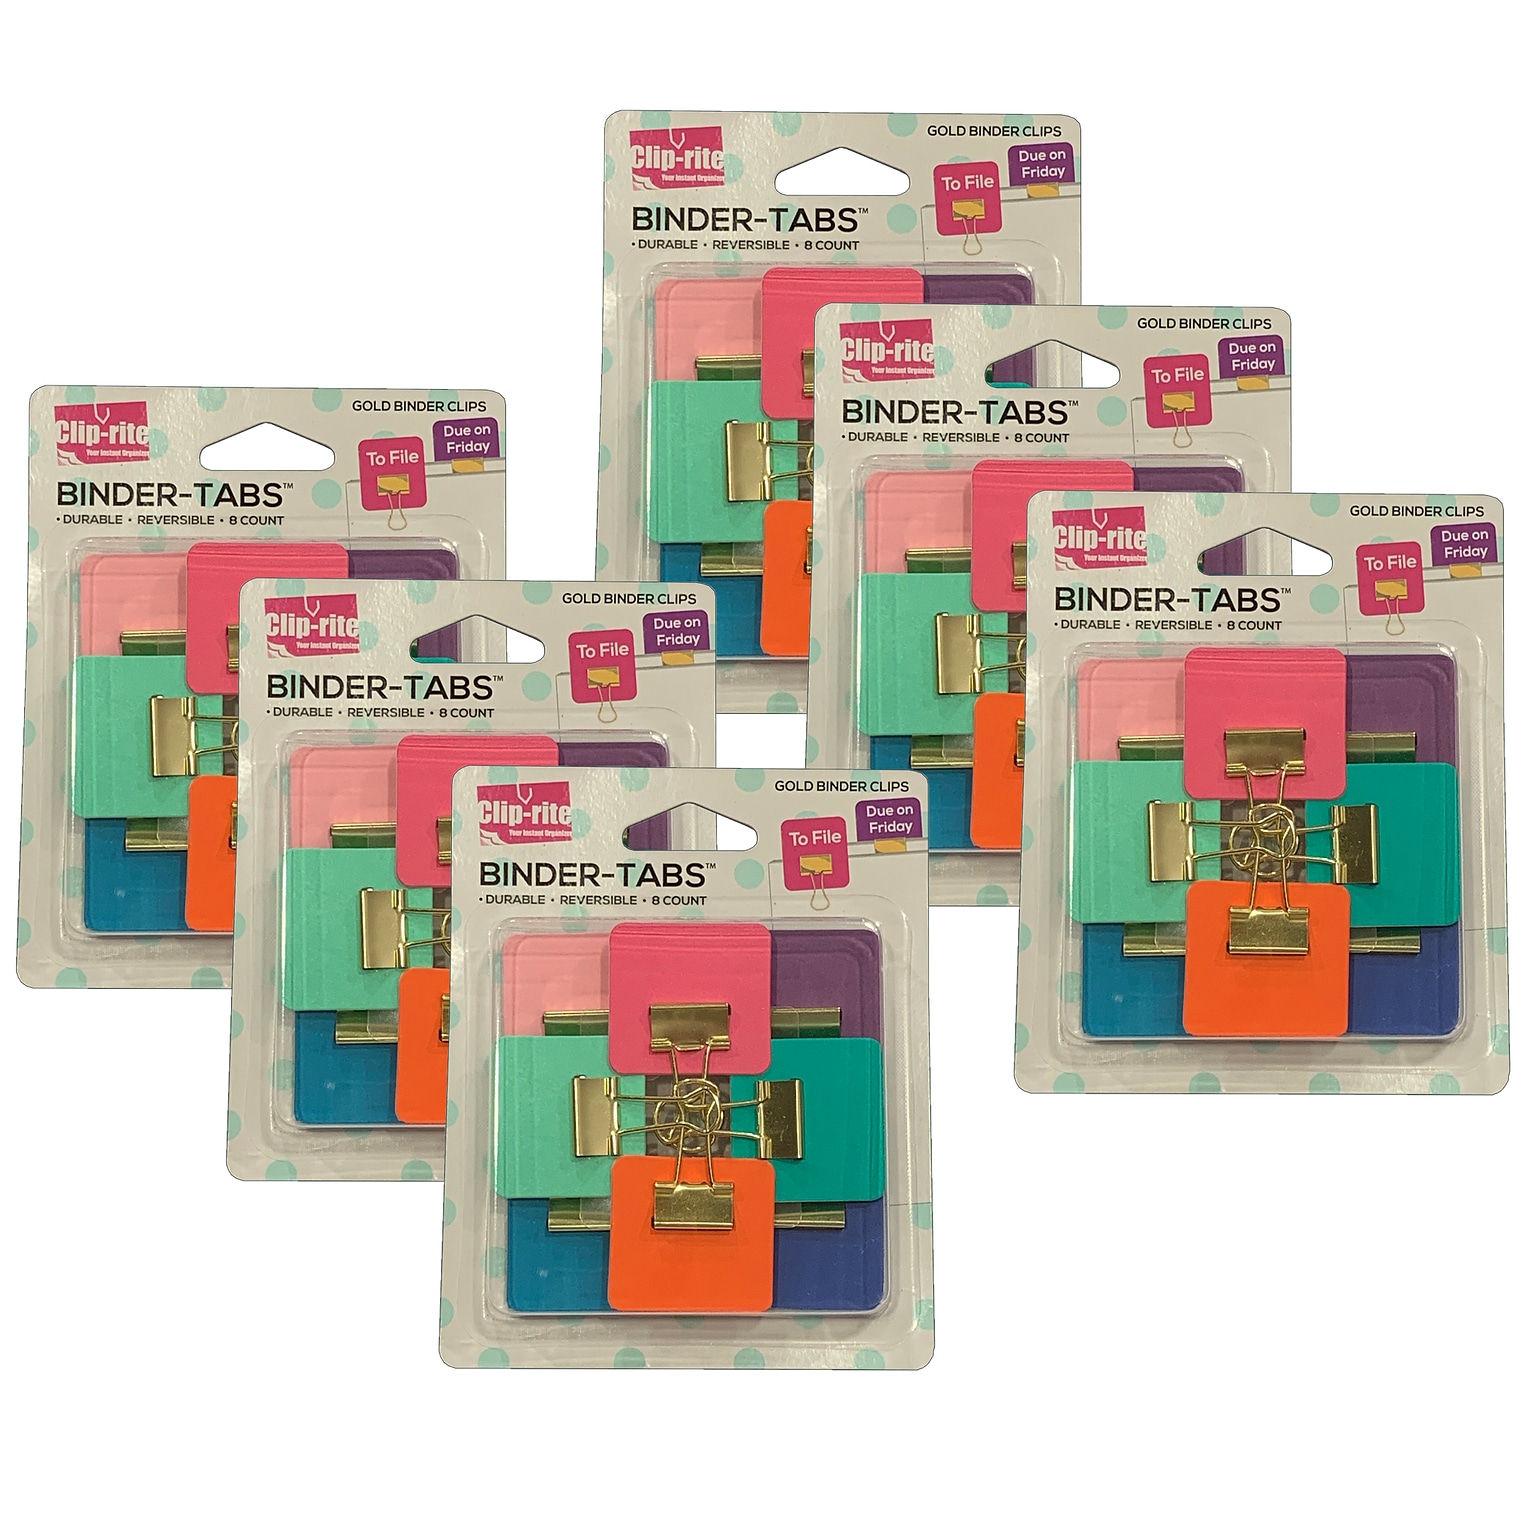 Clip-rite Binder Tabs, Assorted Gold Plated, 8 Per Pack, 6 Packs (CRT111-6)